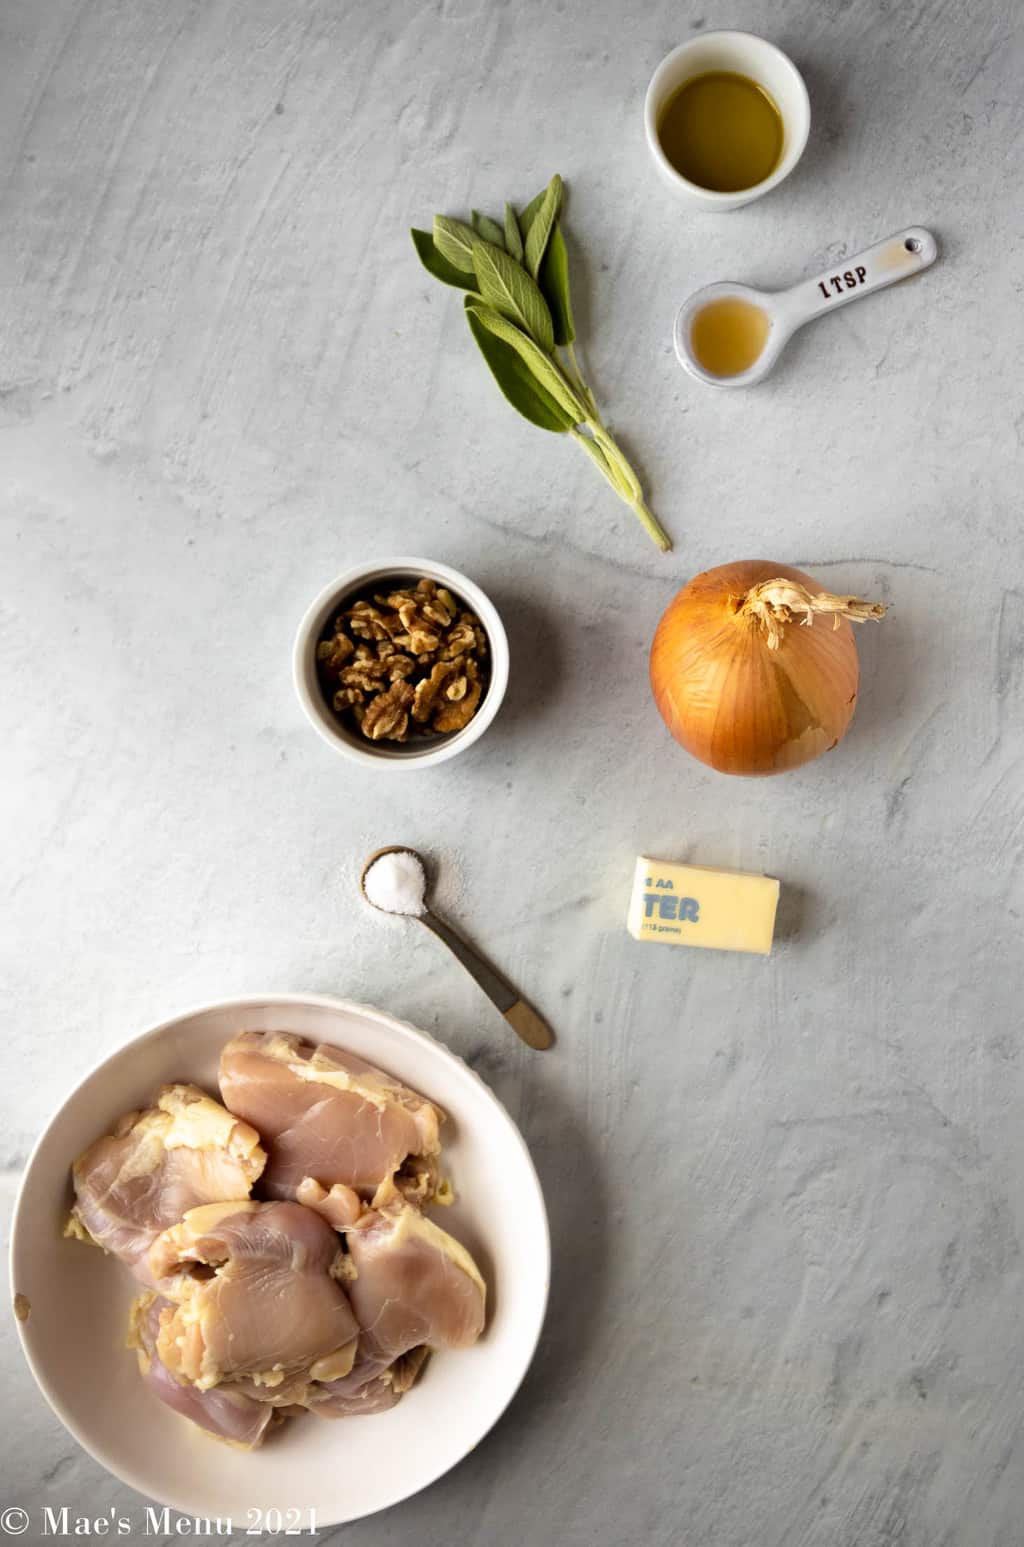 The ingredients for brown butter chicken: chicken thighs, salt, butter, onions, walnuts, sage, apple cider vinegar, and olive oil.